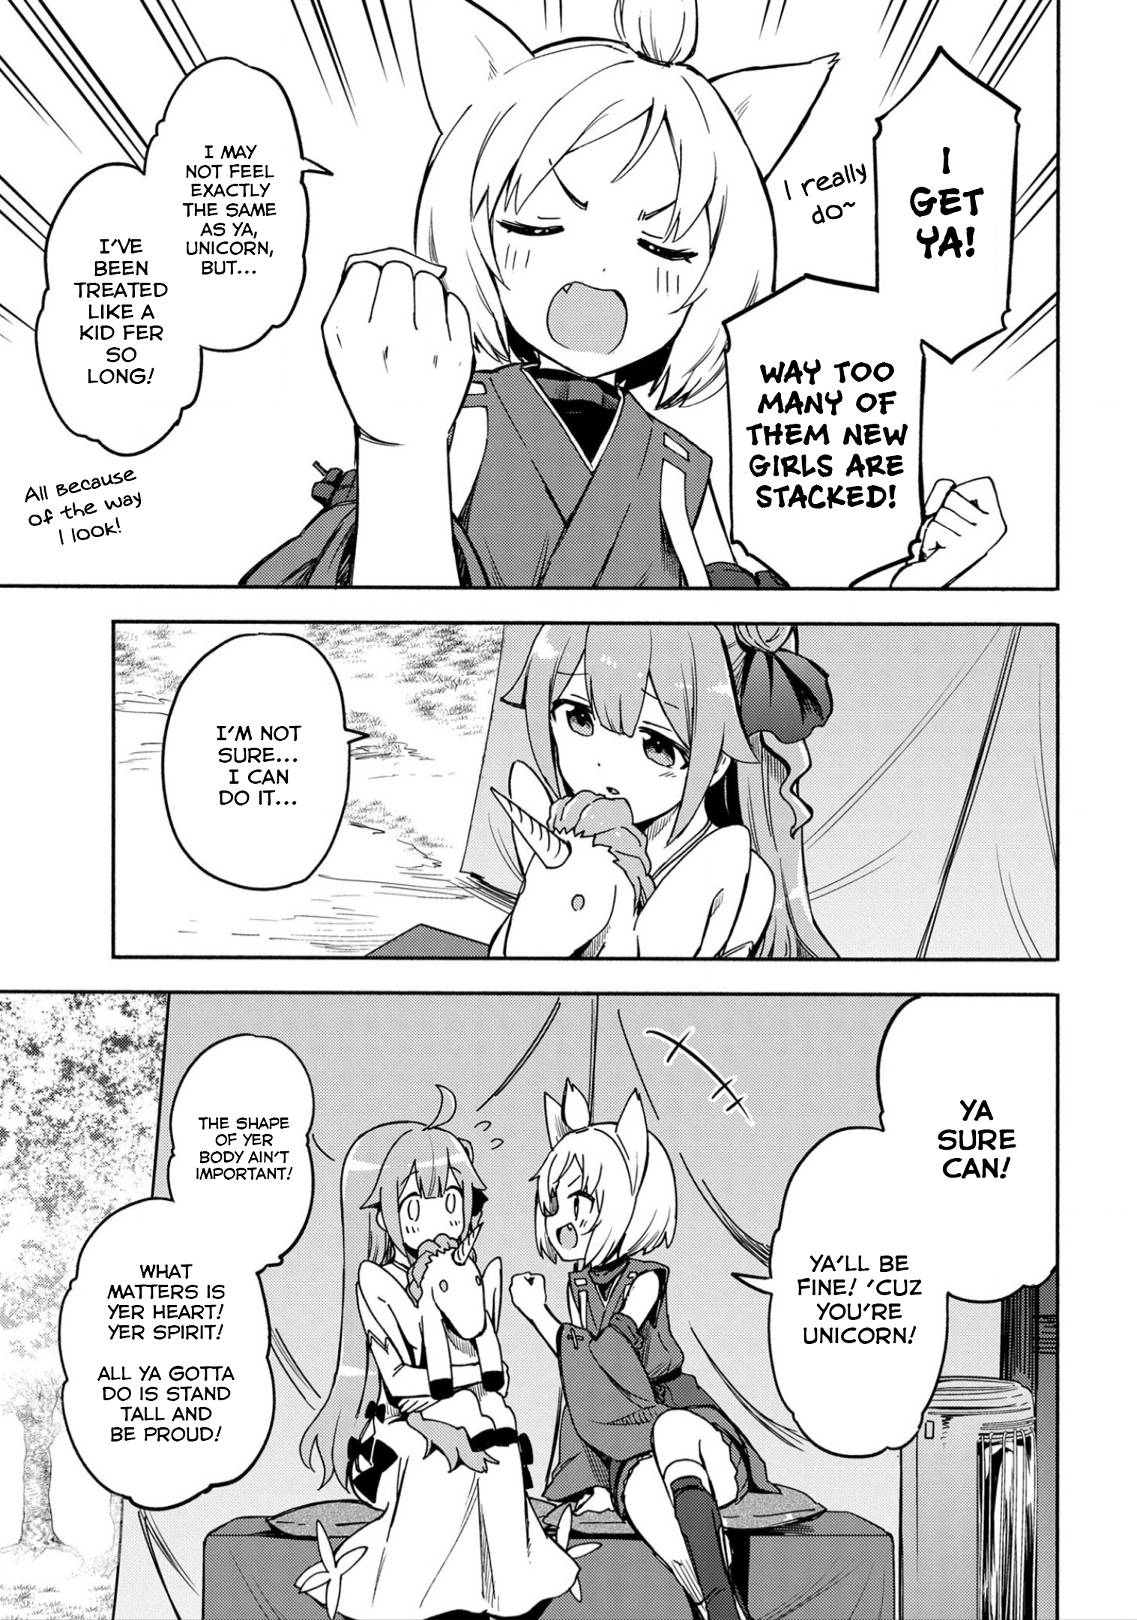 Azur Lane: Queen's Orders chapter 207 page 2